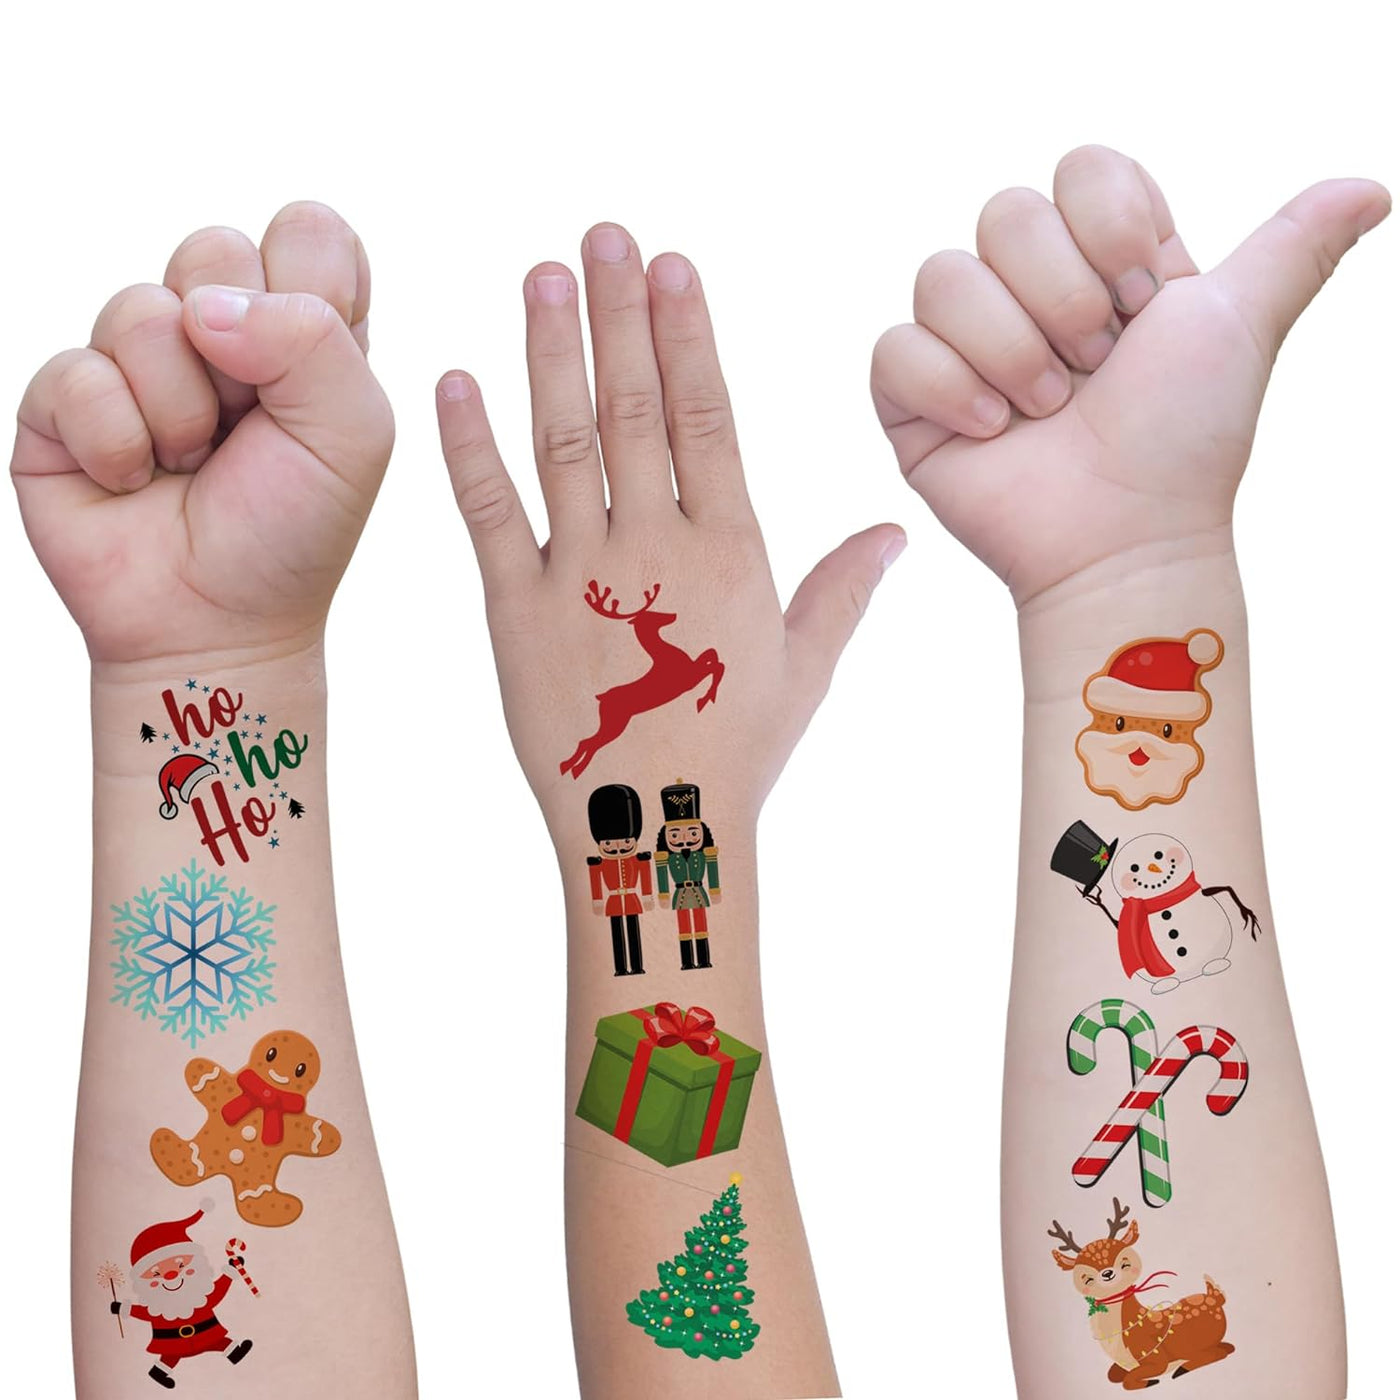 ArtCreativity Christmas Tattoos for Kids - Set of 144 - Temporary Tattoos for Kids in 12 Festive Designs - Easy to Apply and Remove - Christmas Party Favors for Kids - Holiday Stocking Stuffers